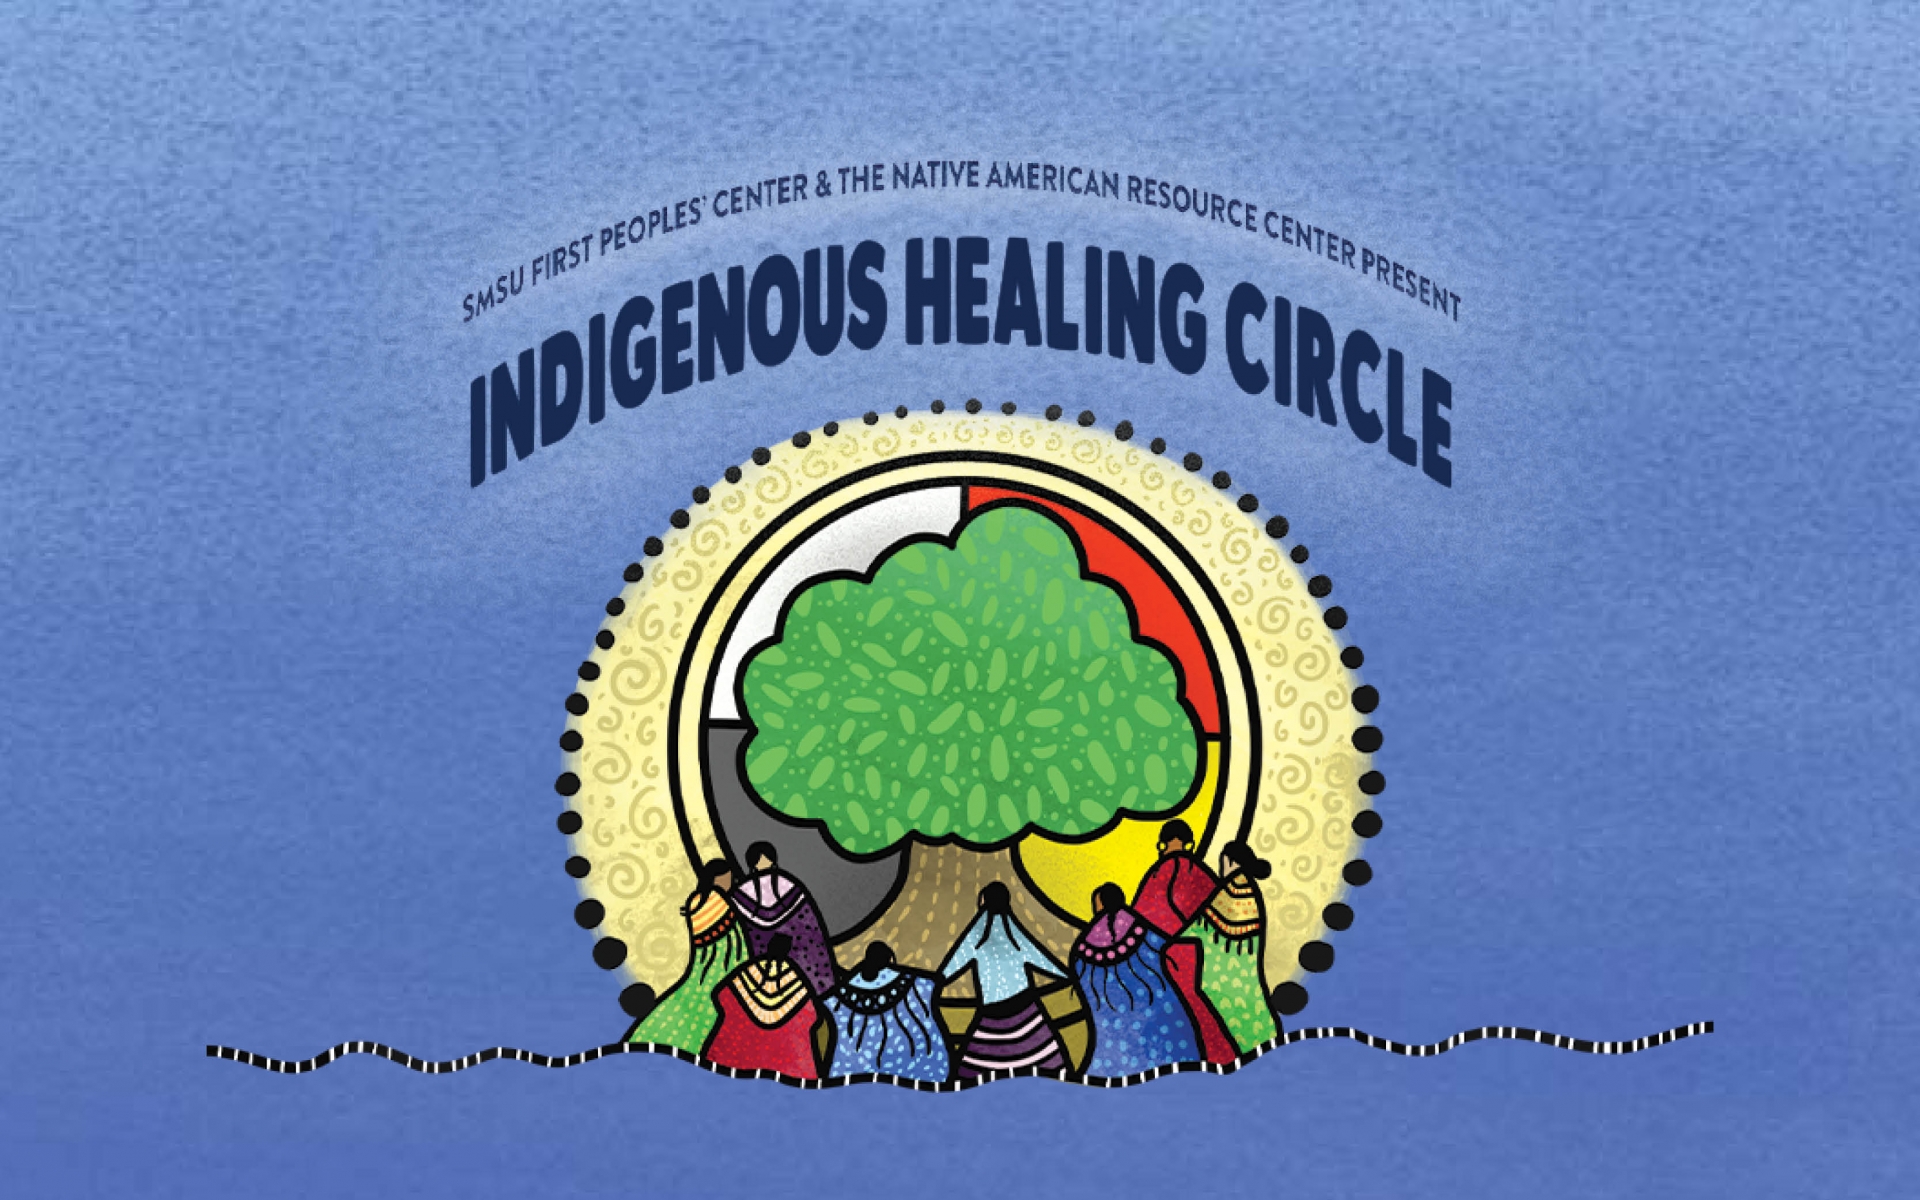 Image depicting indigenous healing practices in a circular environment.